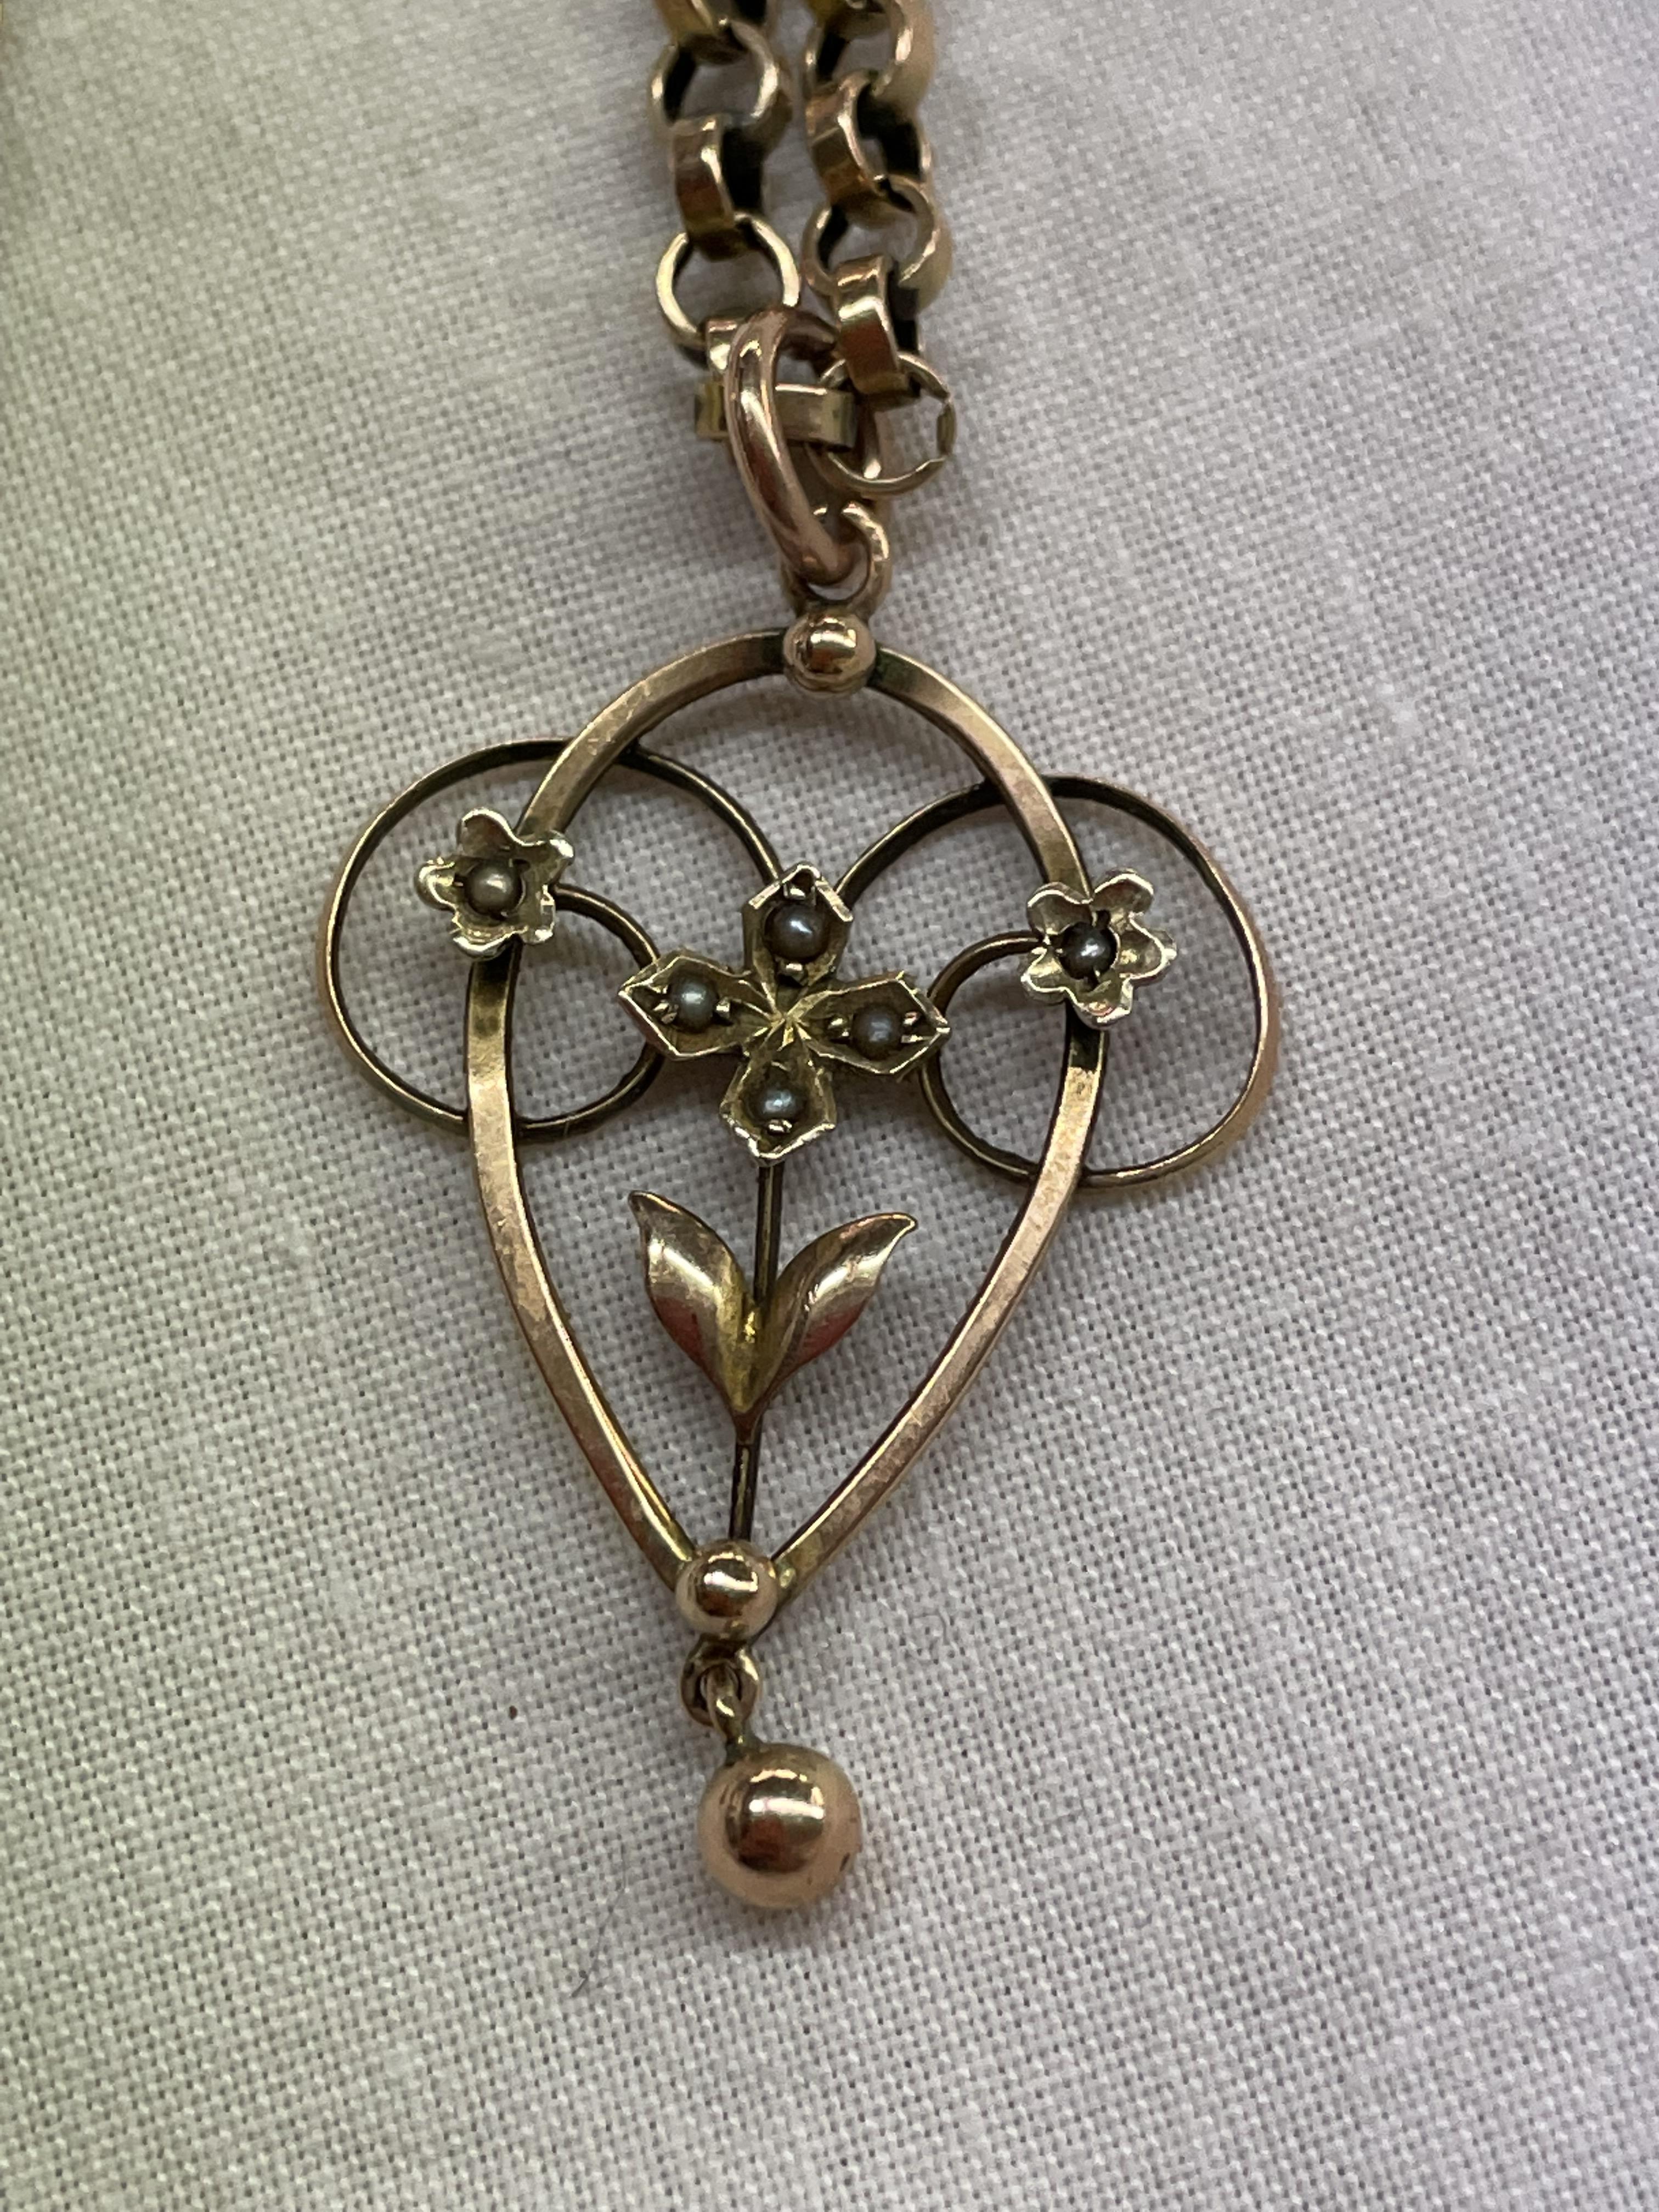 9CT ROSE GOLD BELCHER CHAIN WITH A 9CT ART NUV AND SEED PENDANT 6. - Image 2 of 5